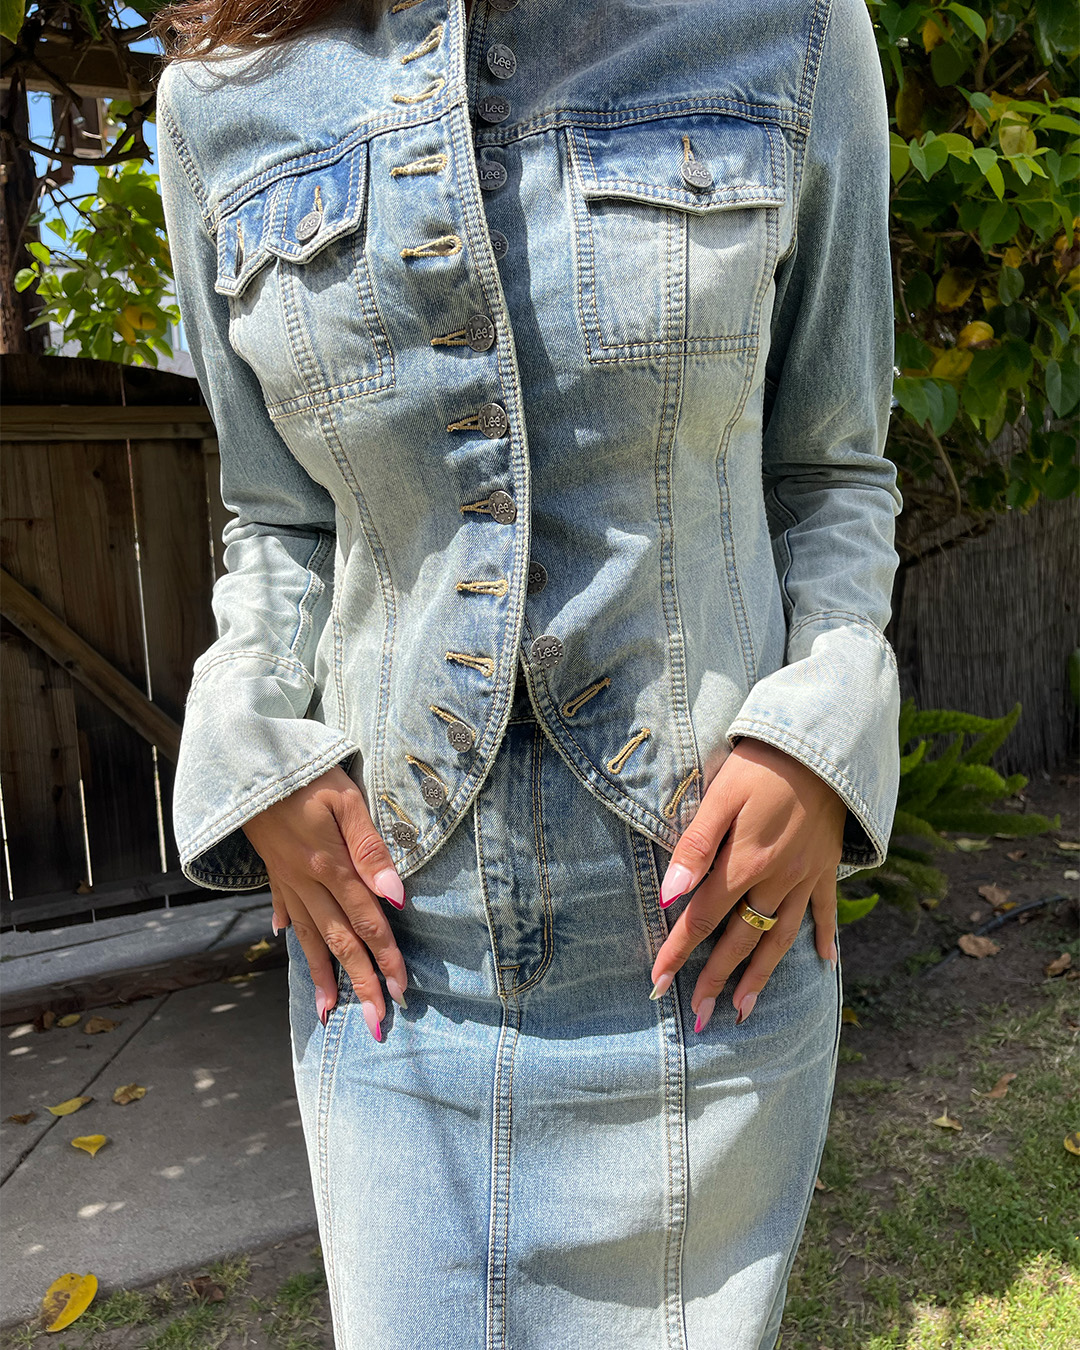 Pic of woman wearing Lee jeans denim jacket and skirt